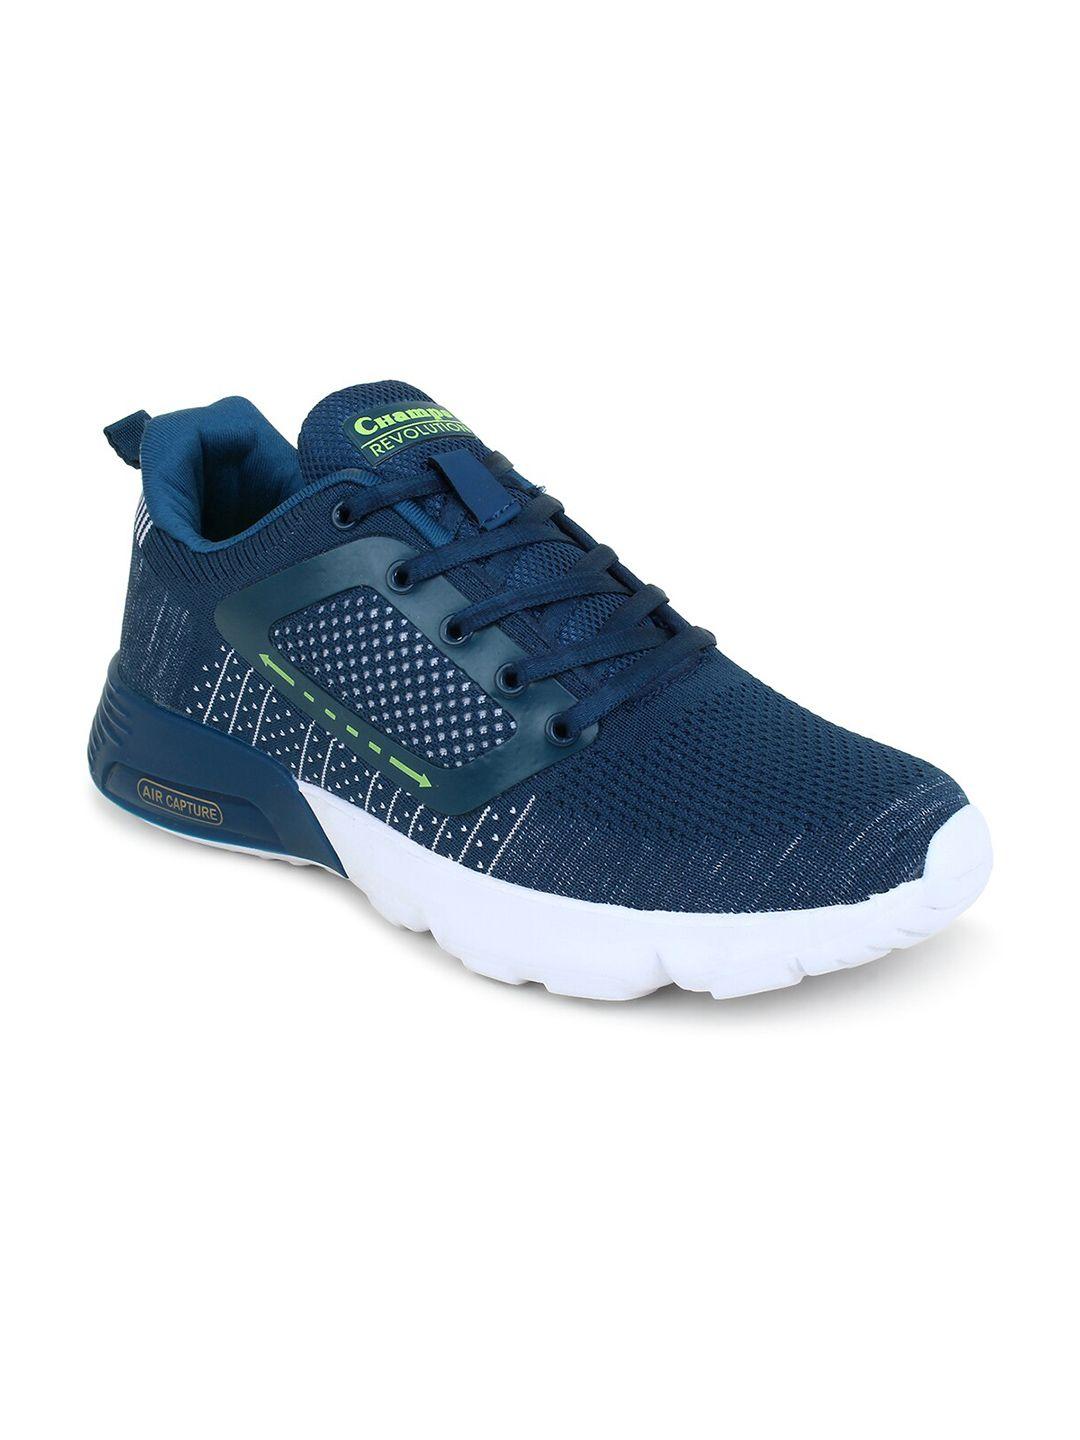 champs men air plus technology non-marking running sports shoes